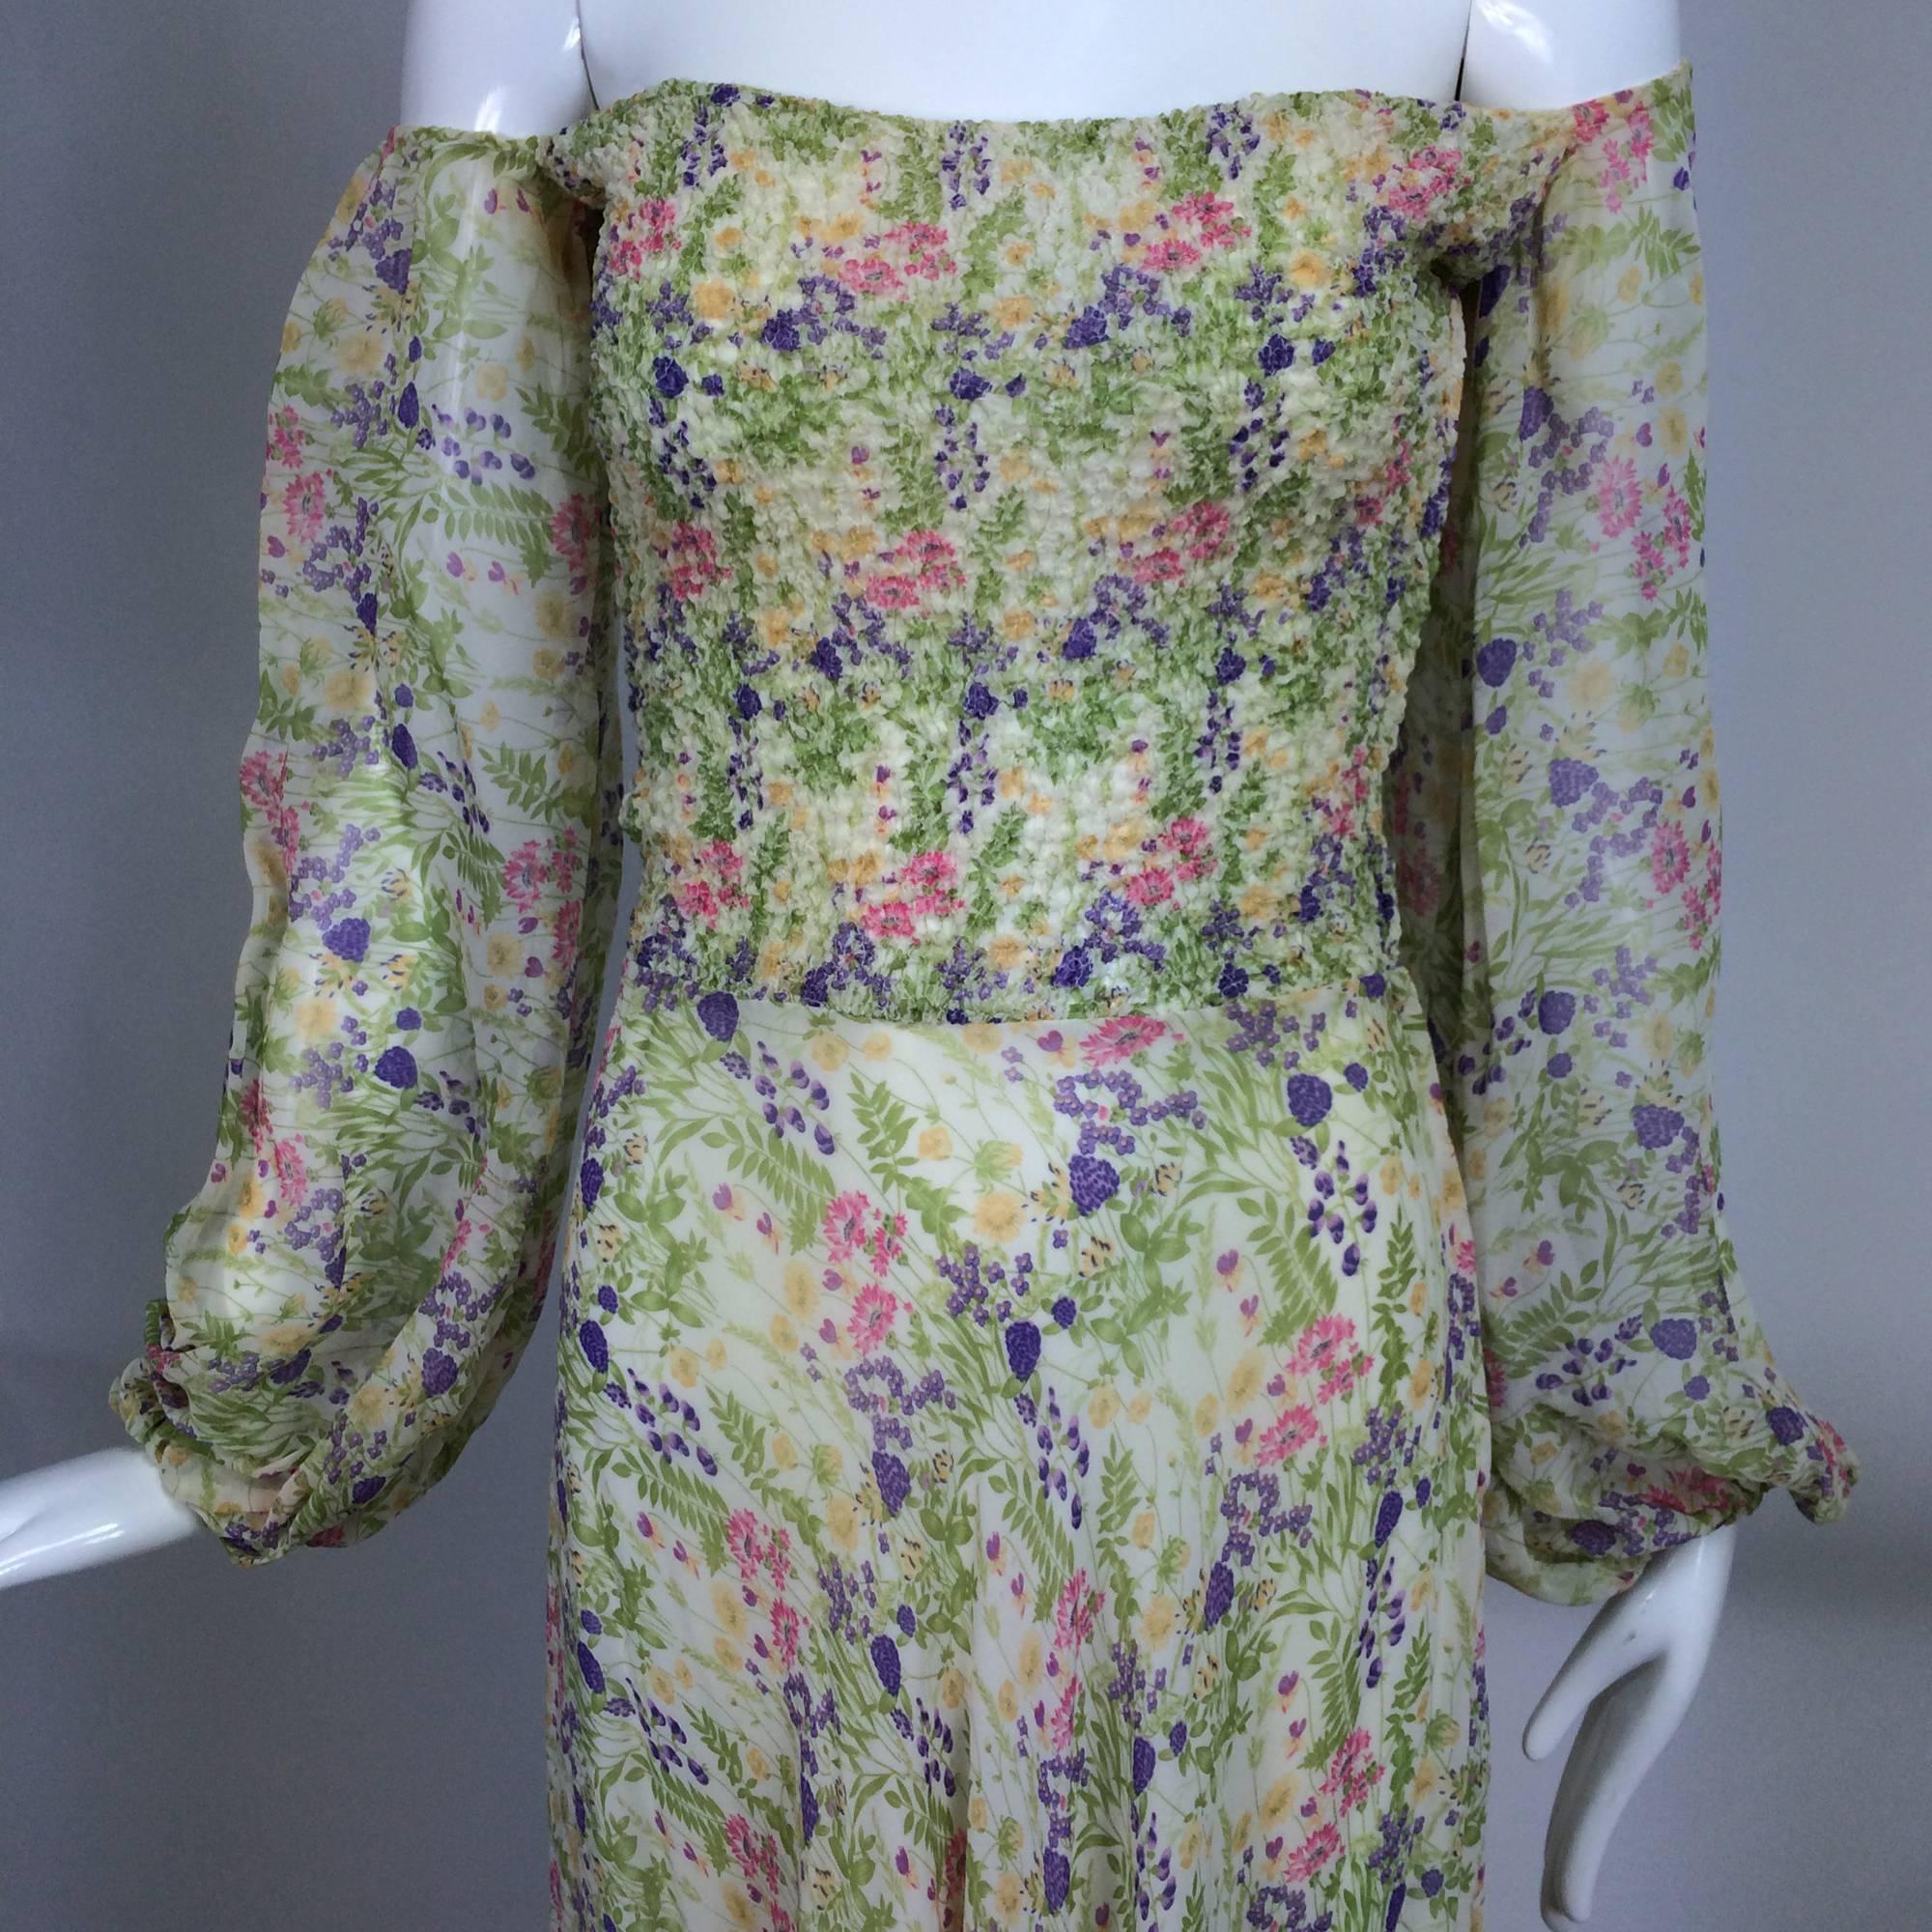 Vintage Judy Hornby London floral chiffon shirred bodice dress 1970s...
A sweet floral print in soft colours set on cream rayon chiffon...An earlier label probably before her exit to New York in the later 1970s...Hornby found great success in the